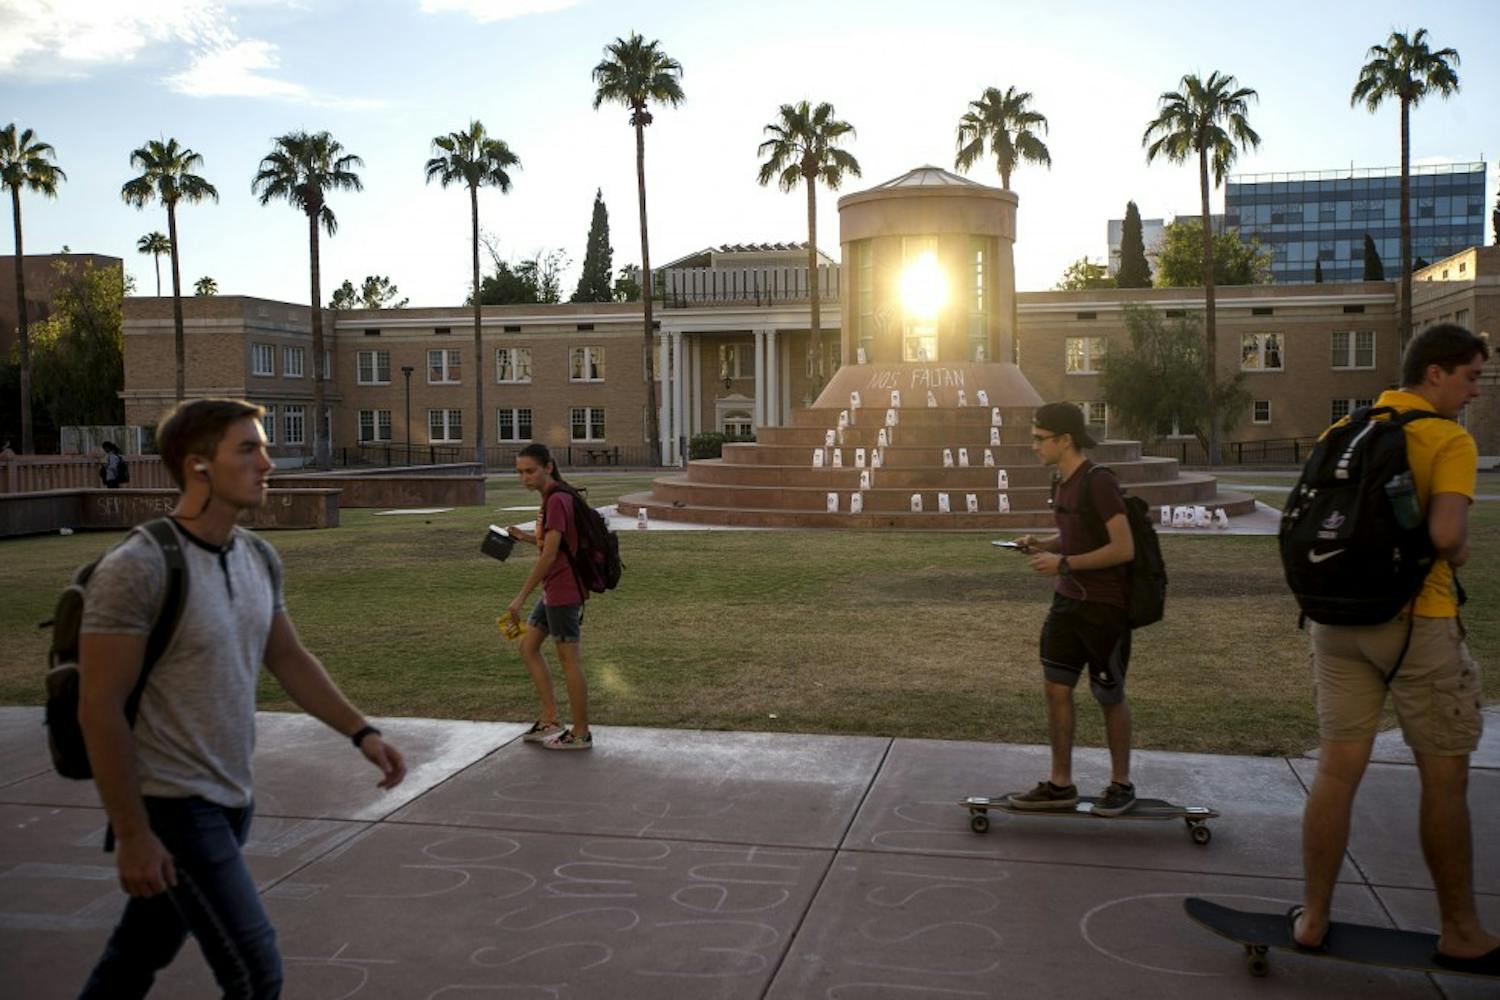 Students ride past a memorial on Hayden Lawn on the Tempe Campus on Tuesday, Sept. 27, 2016. The memorial was set up to remember the 43 students who disappeared from Ayotzinapa Rural Teachers' College in Mexico in 2014.